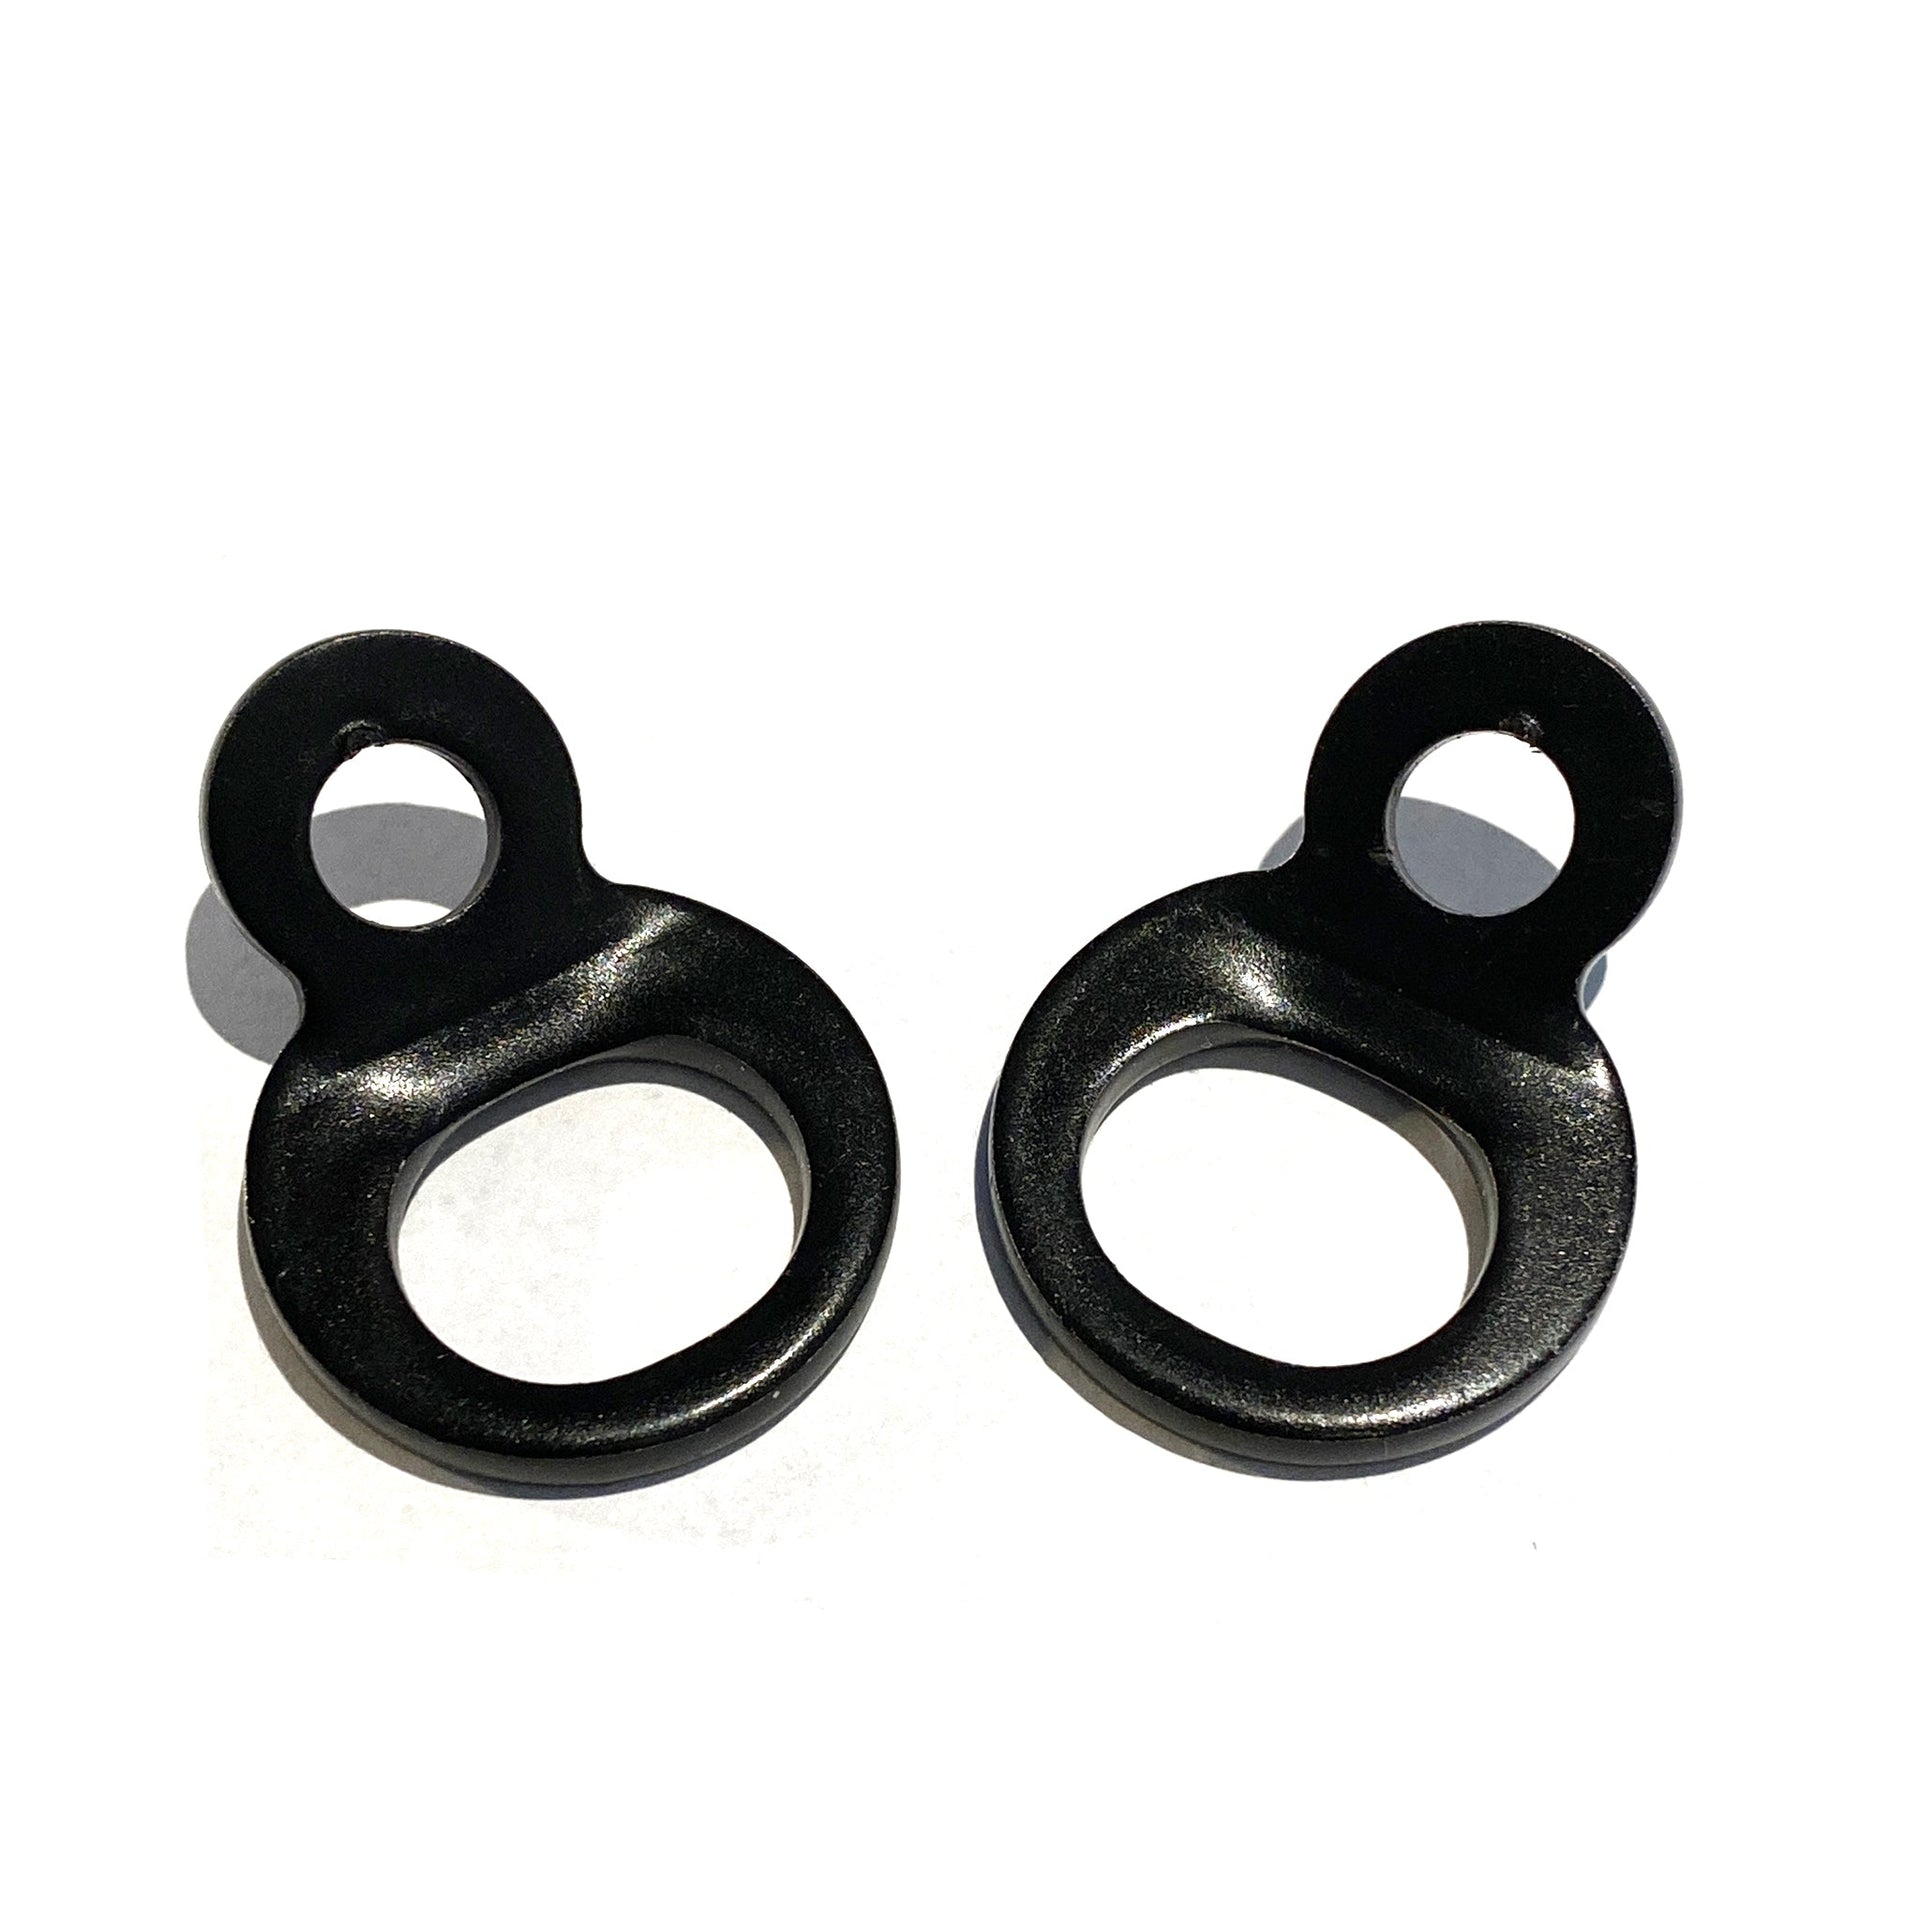 Enduro-Pro - QuickFit Tie Down Rings